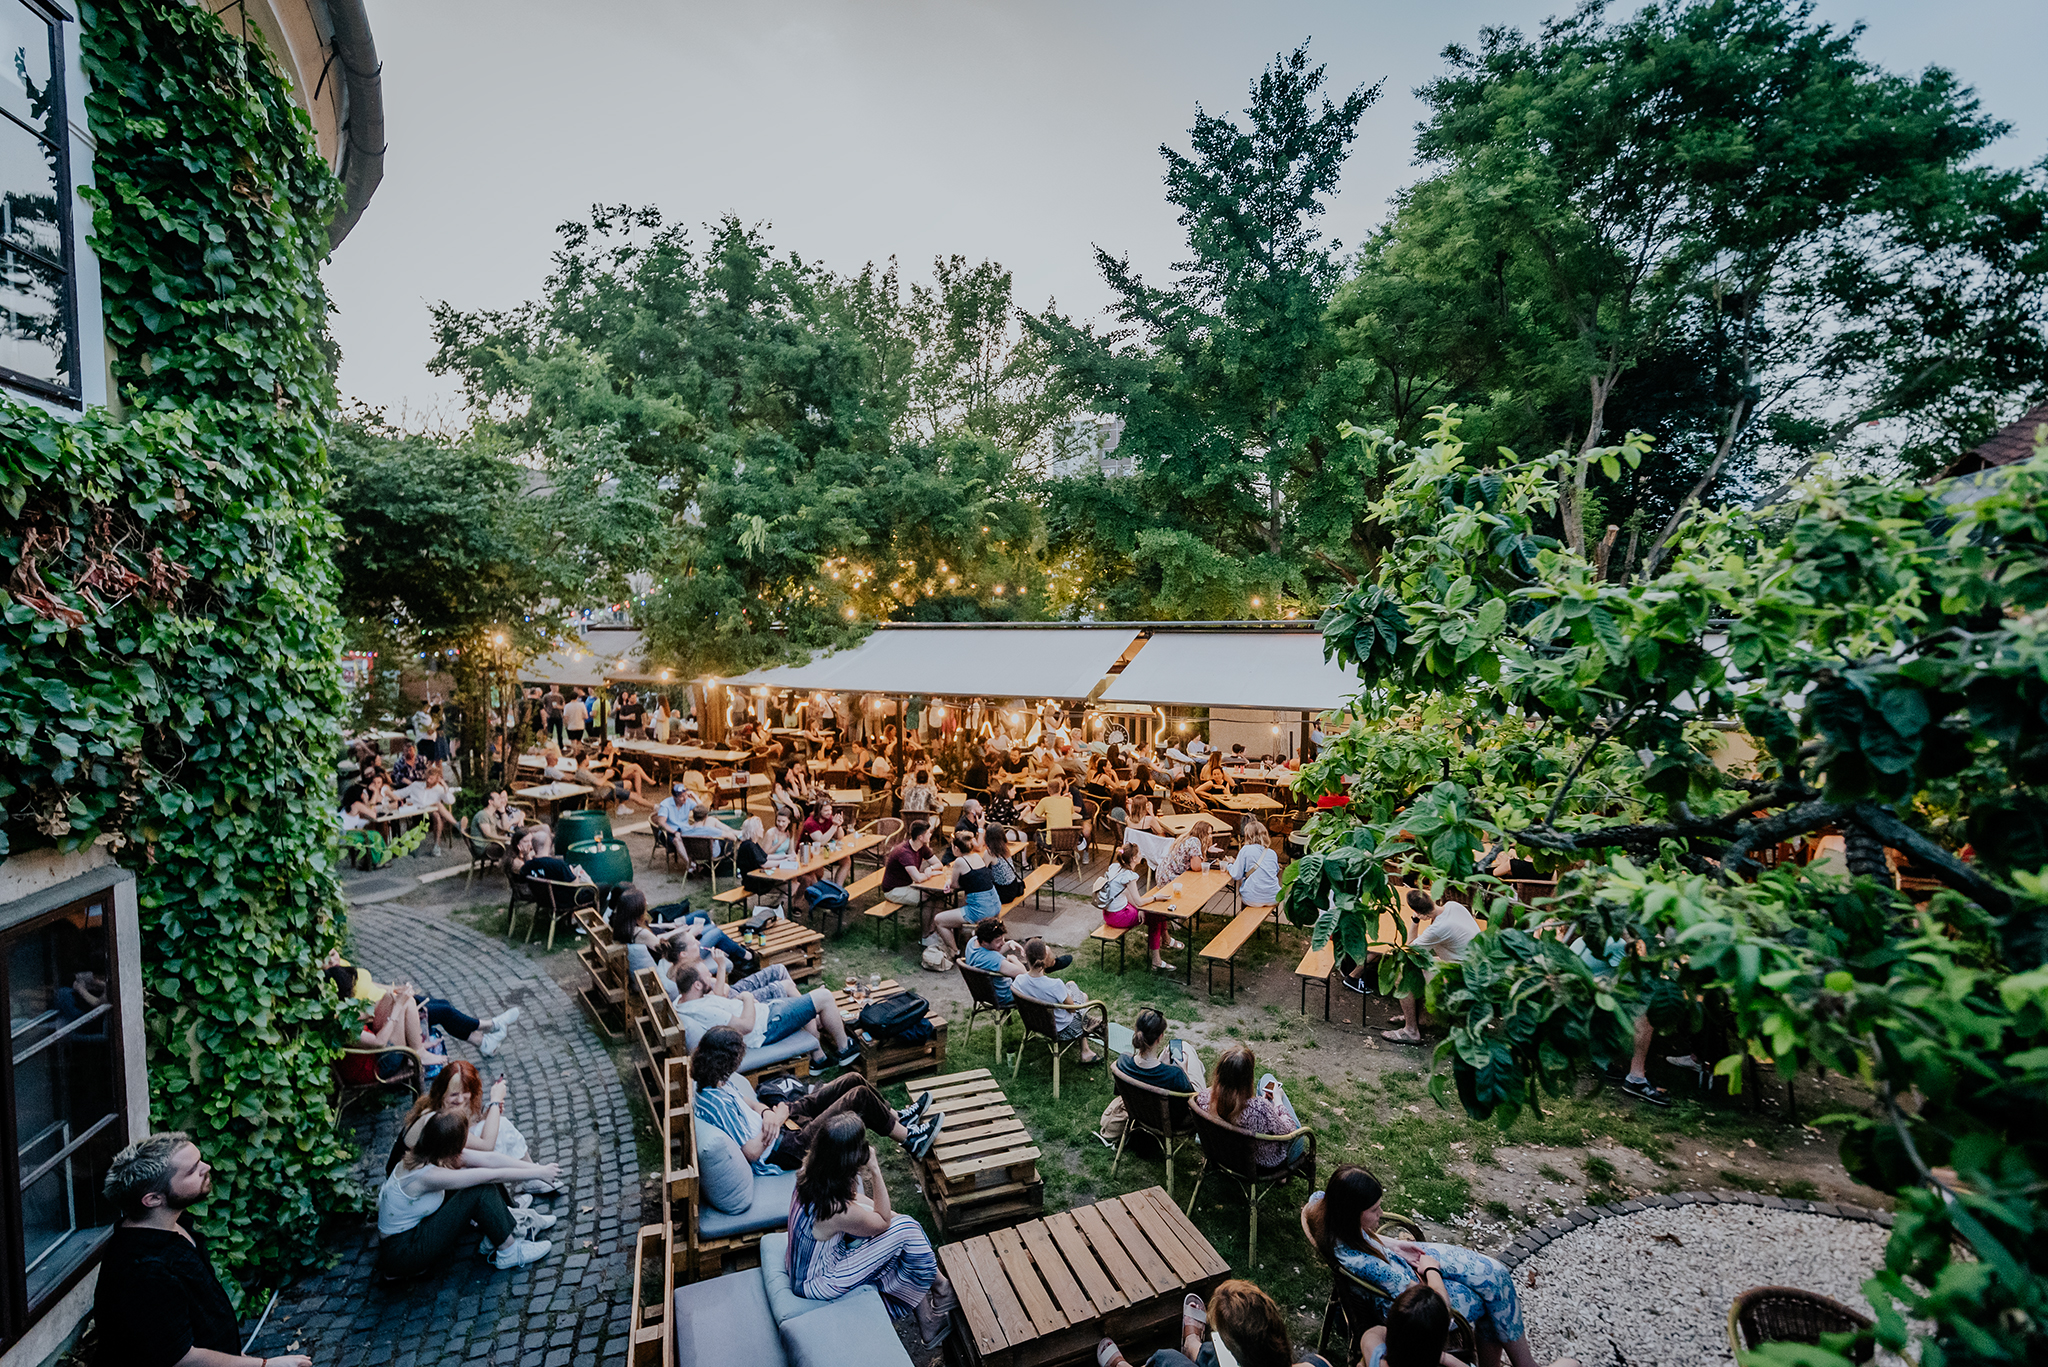 A hidden oasis with craft beer and concerts – This is Mad Garden Buda